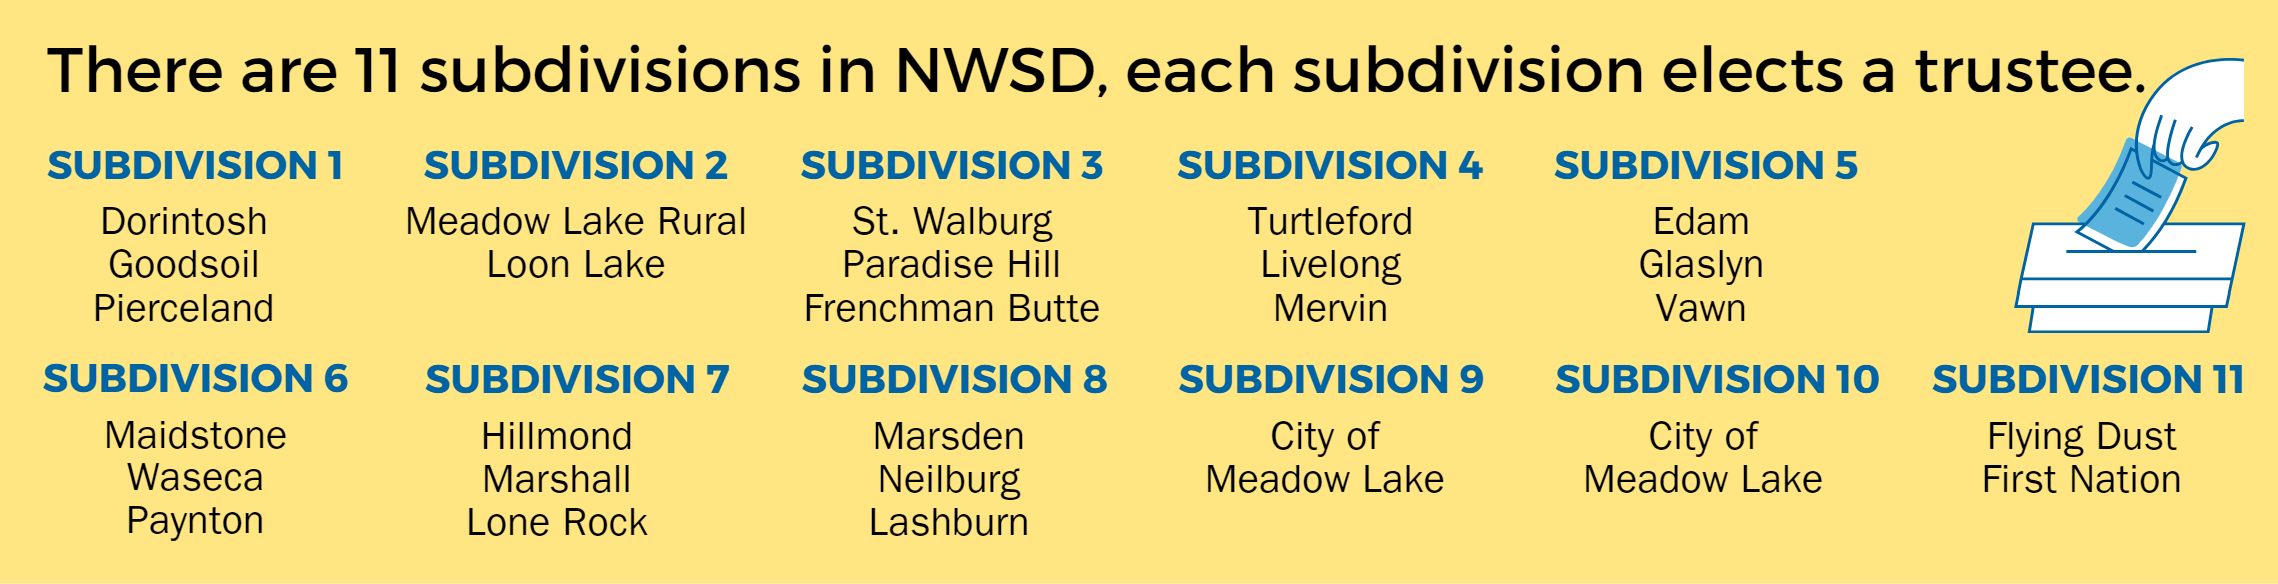 11 Subdivisions in NWSD, each subdivision elects a trustee